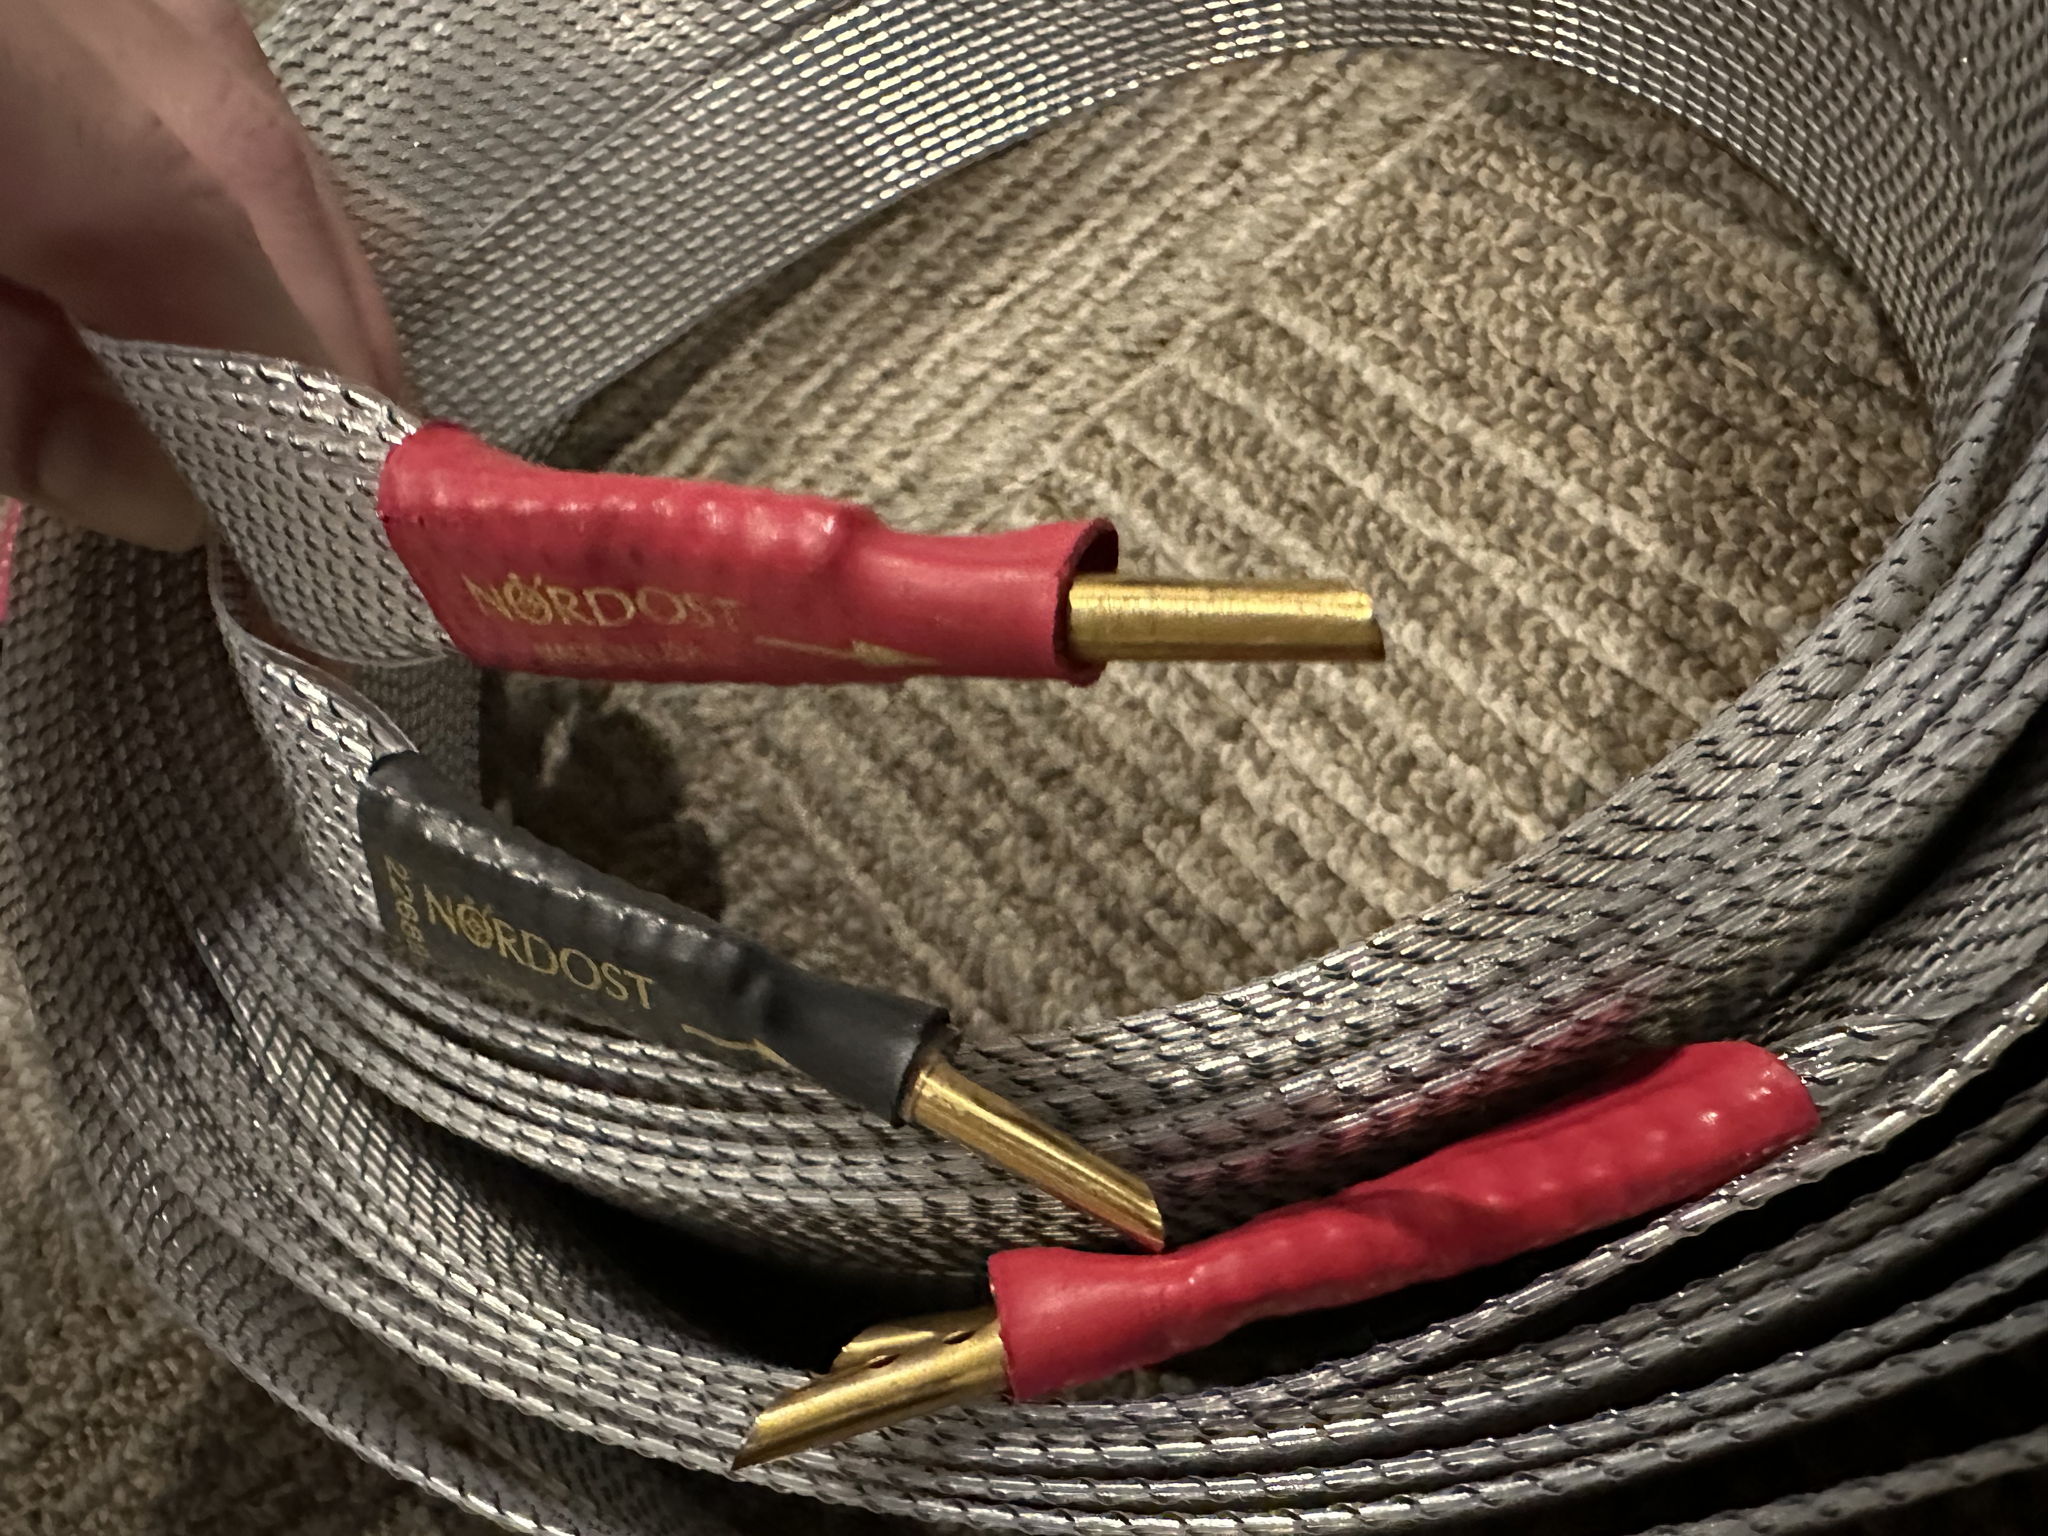 Nordost Tyr 2 Speaker Cables (4m, Pair) 2